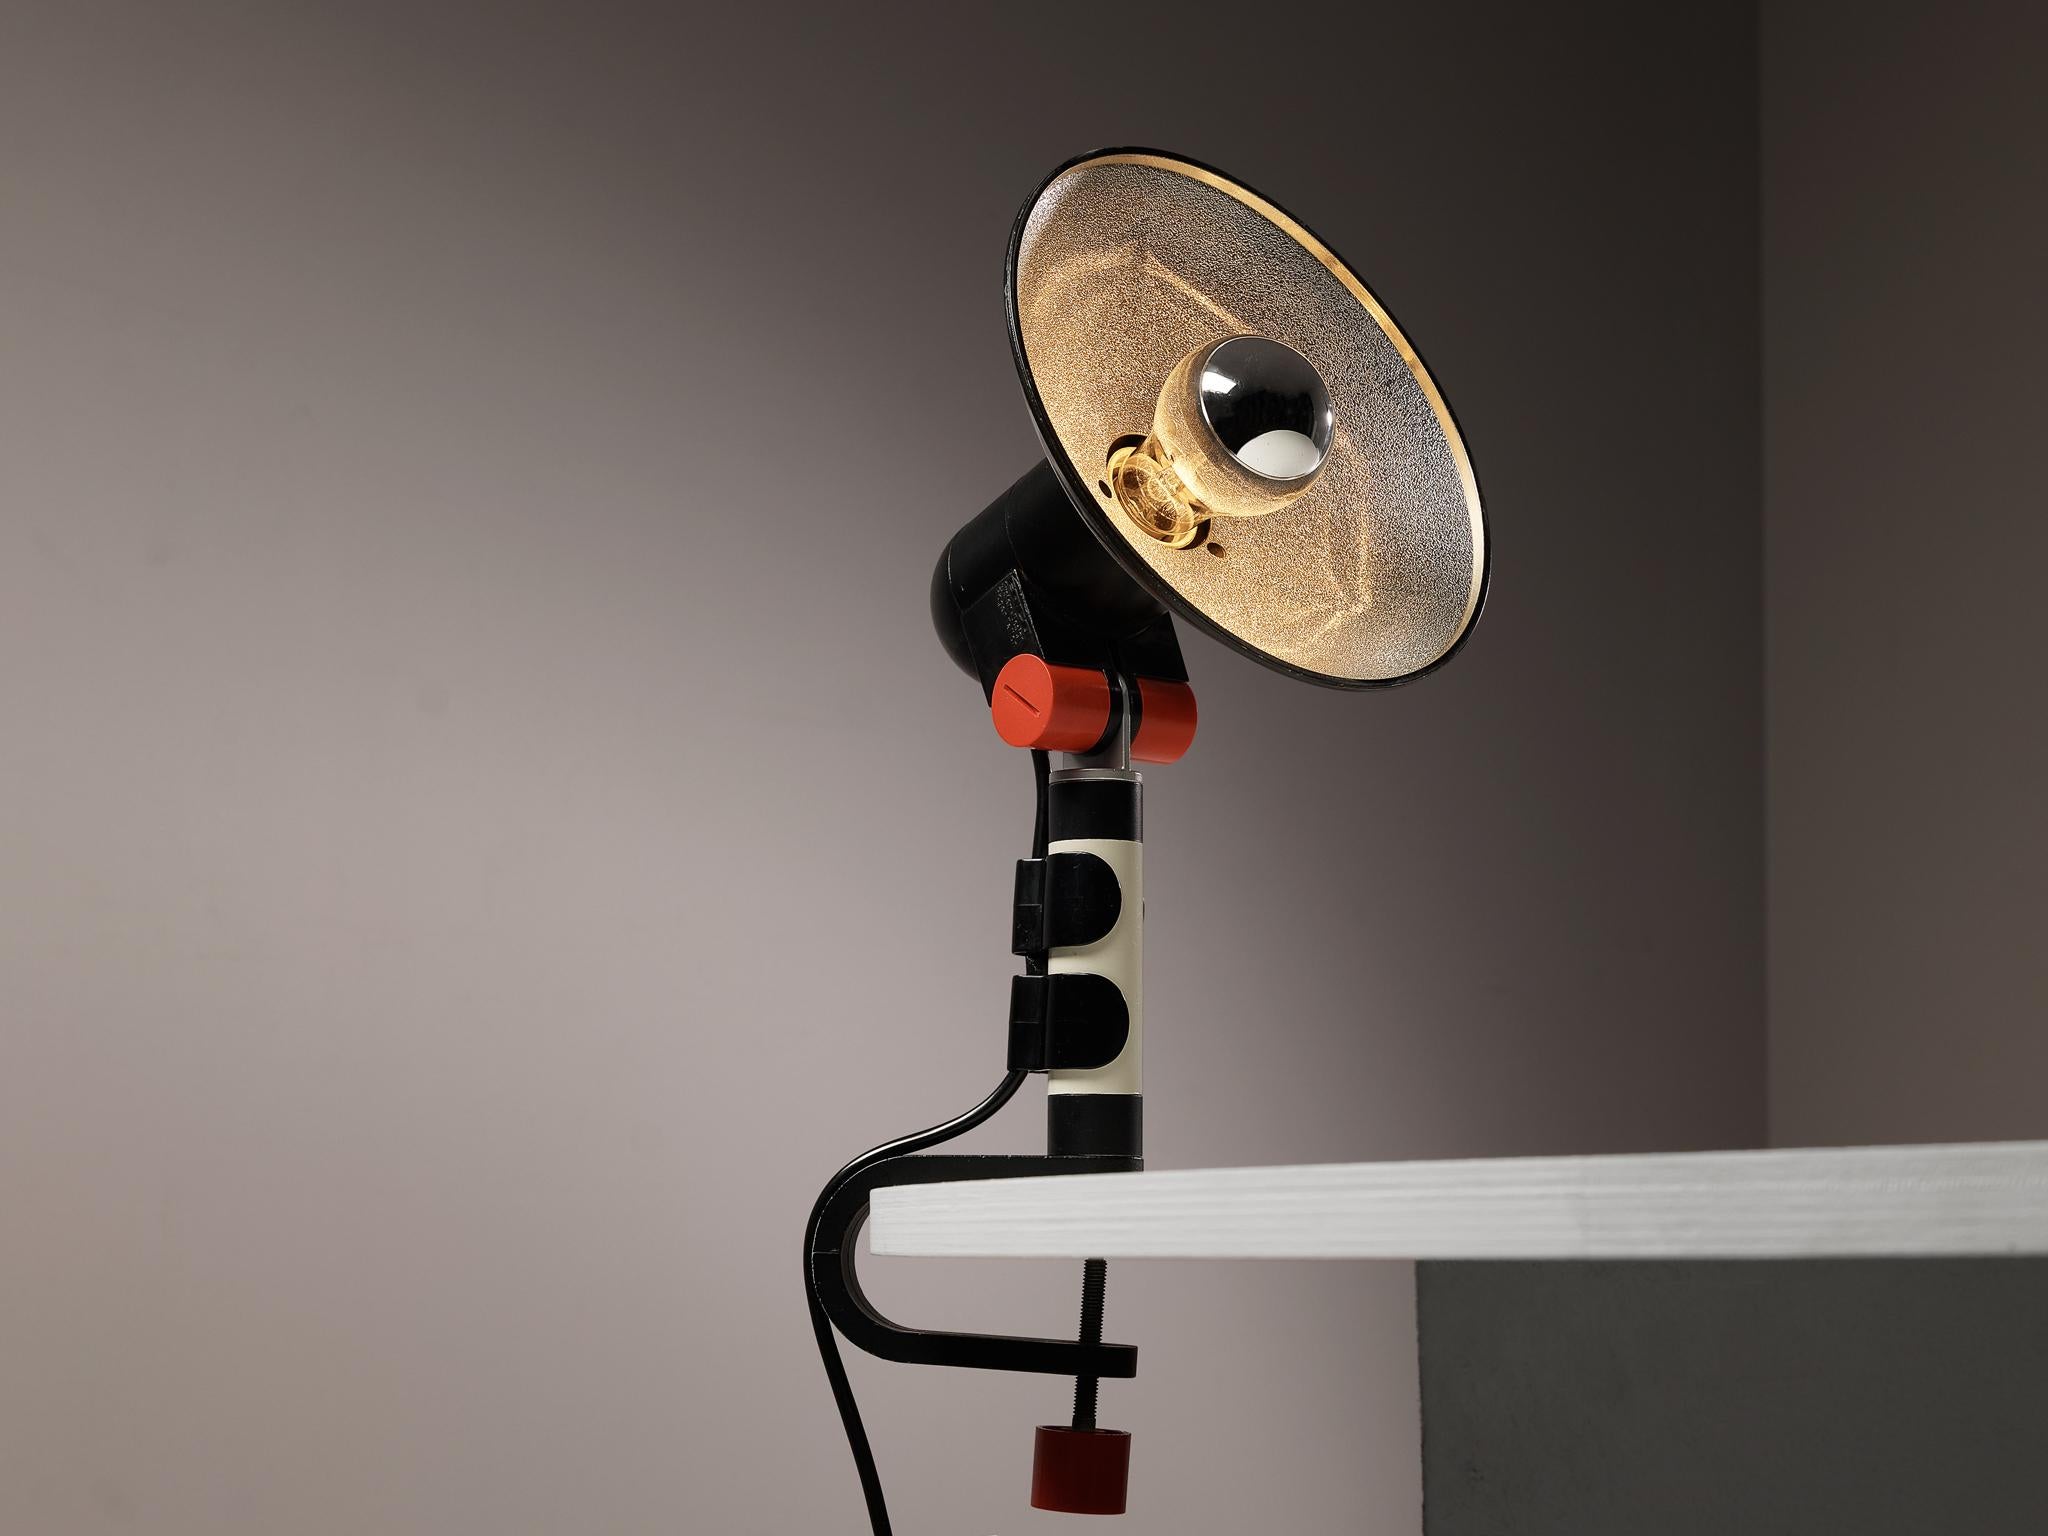 Roger Tallon for Erco, 'Spot' table lamp, plastic, aluminum, metal, France, 1972.

This table lamp is an iconic design by the French designer Roger Tallon. The black and white lamp features bright red details and can be attached to a table top. The